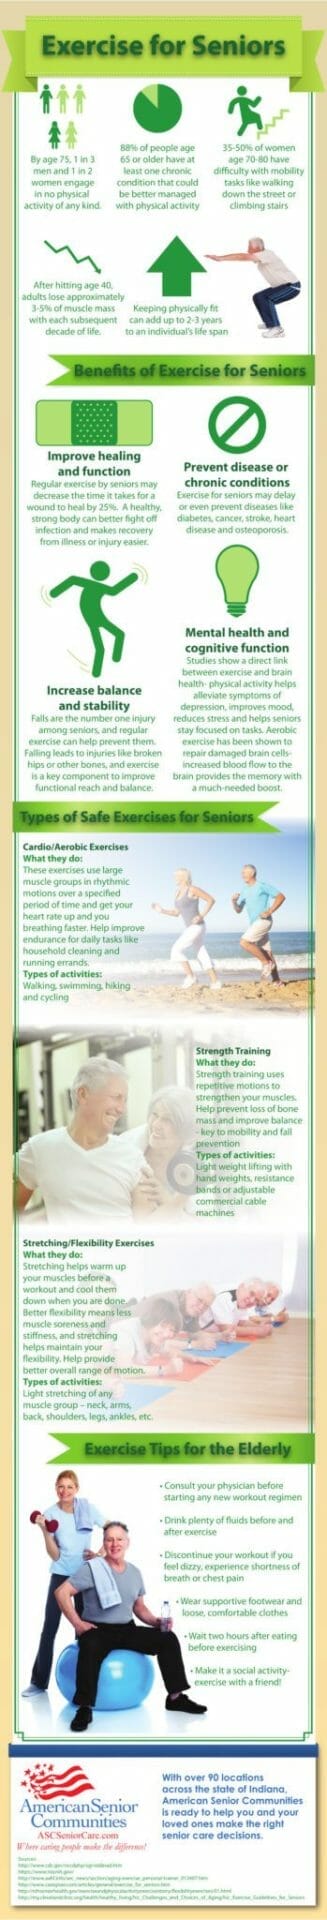 5 gentle workouts for seniors